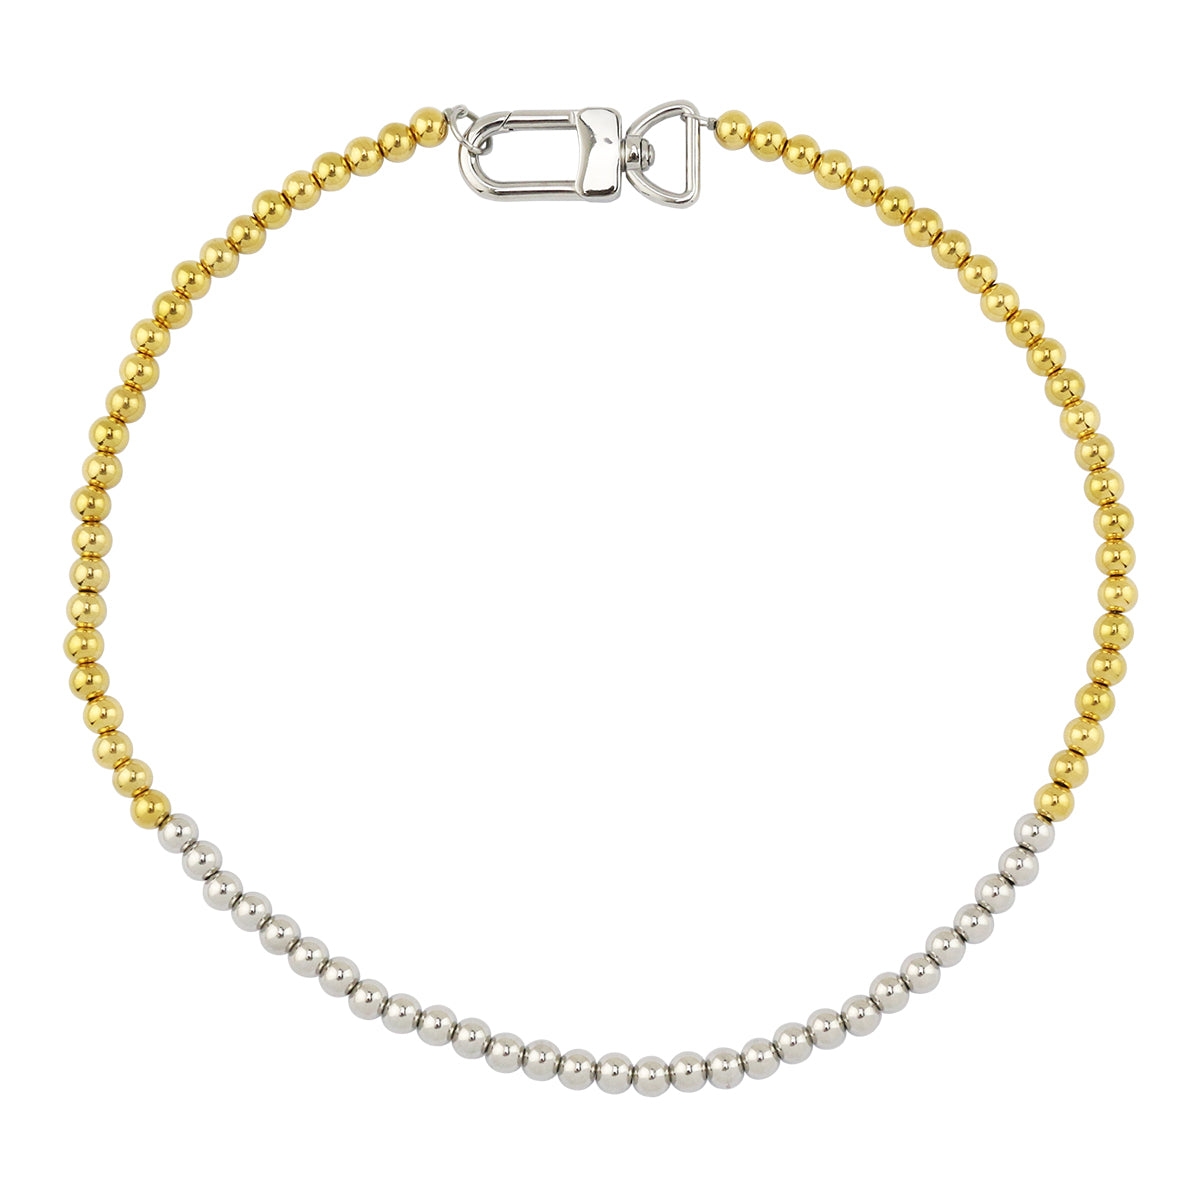 Diana Beaded Necklace - Two Tone